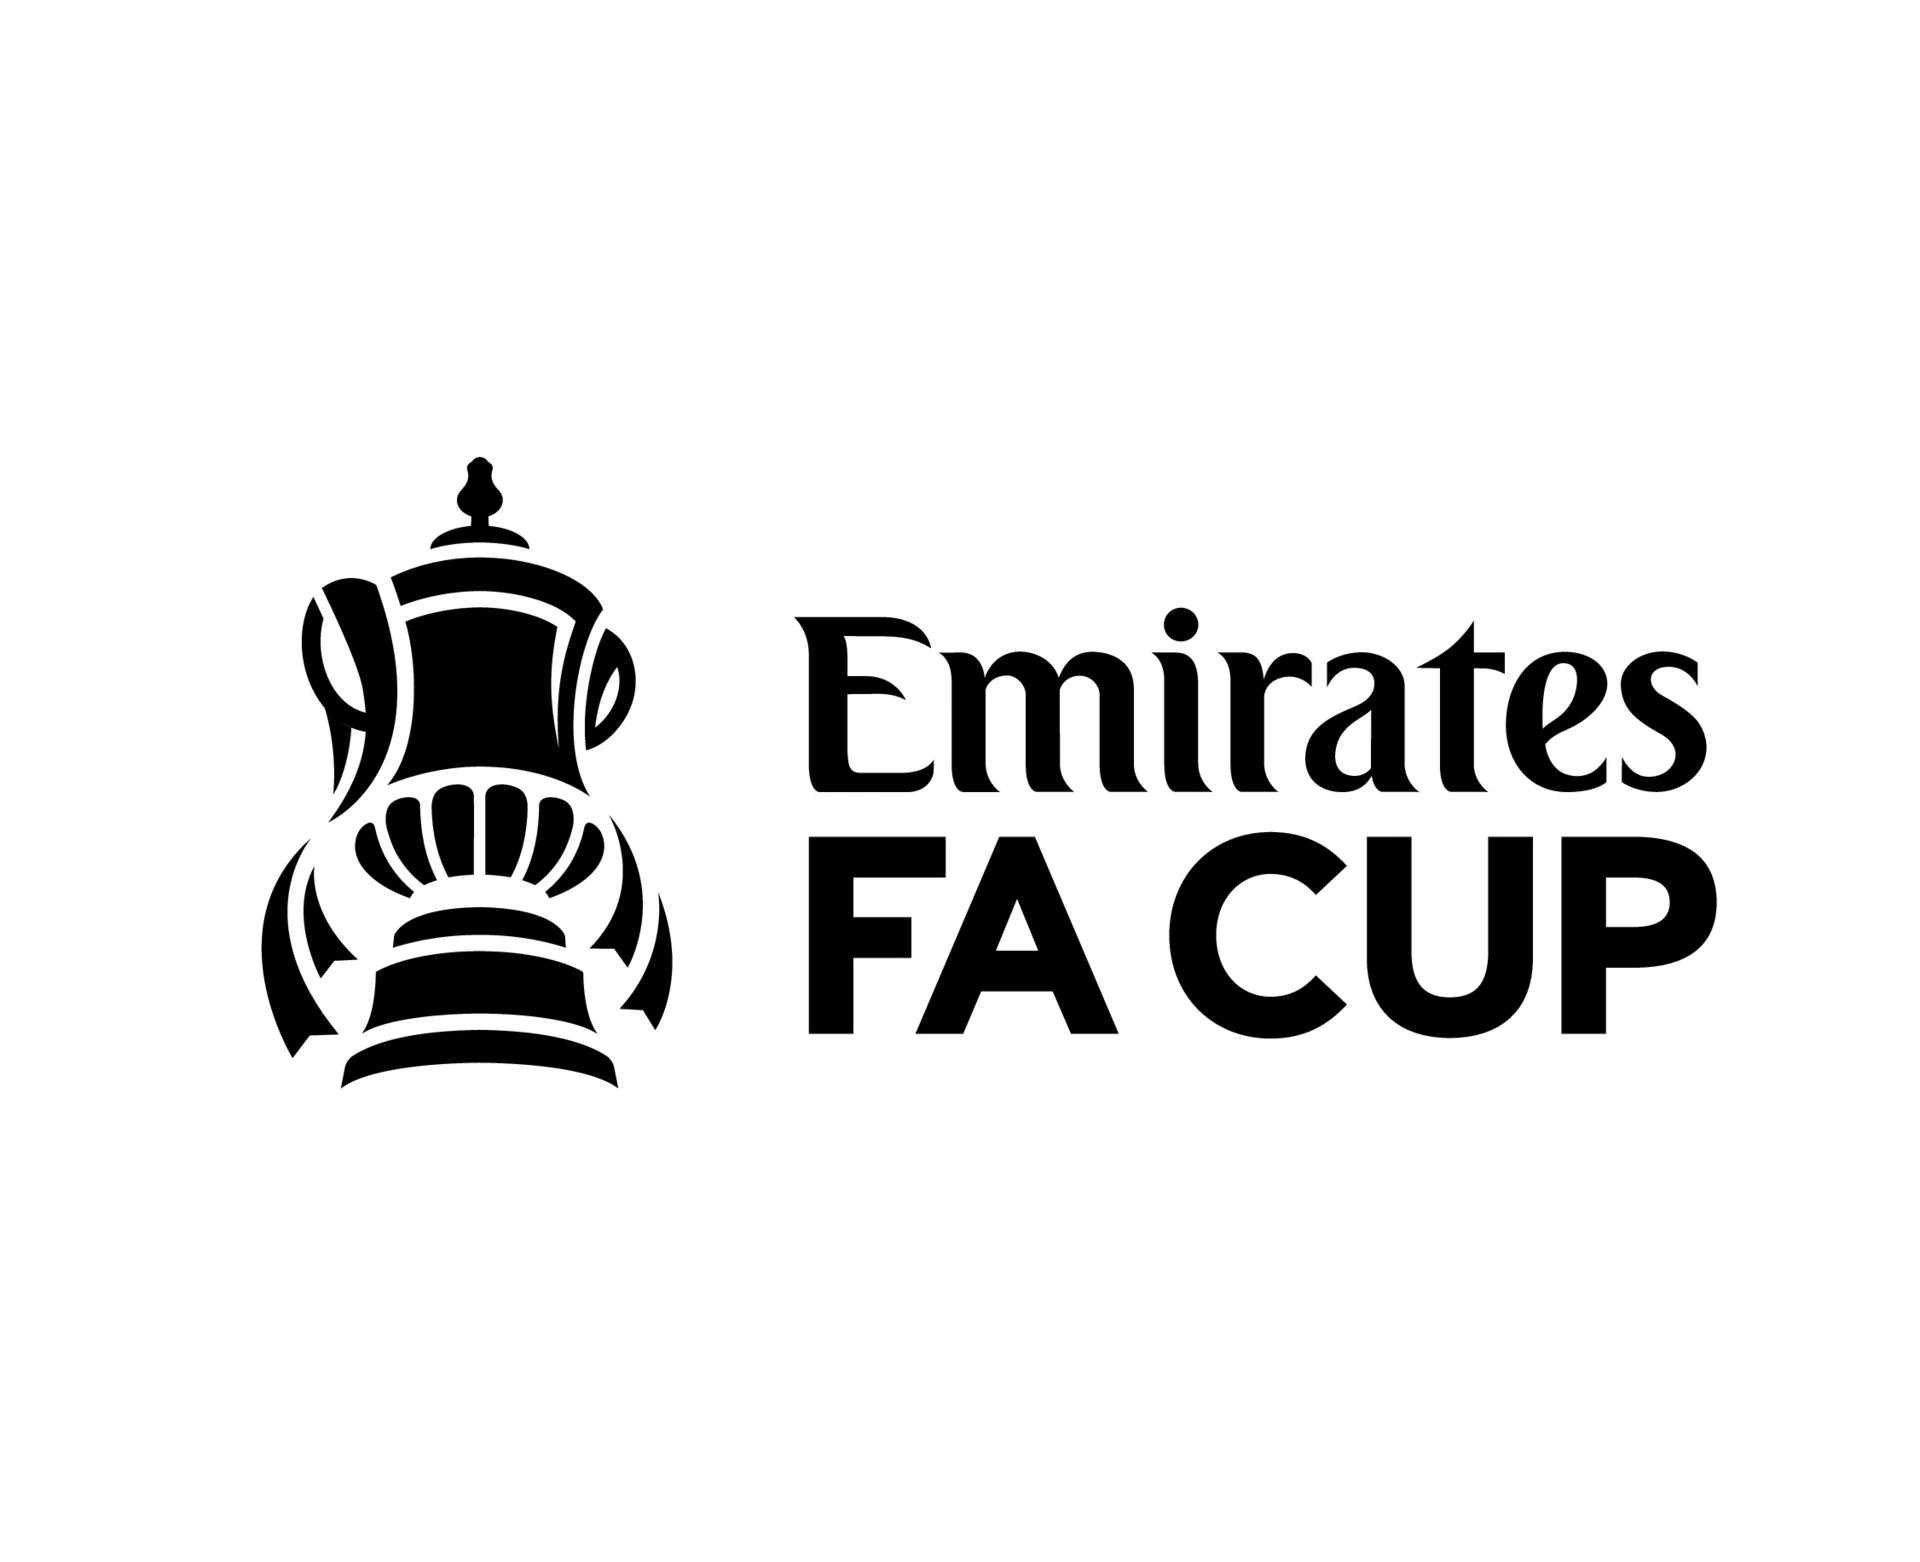 vecteezy emirates fa cup logo with name black symbol abstract design 25409628